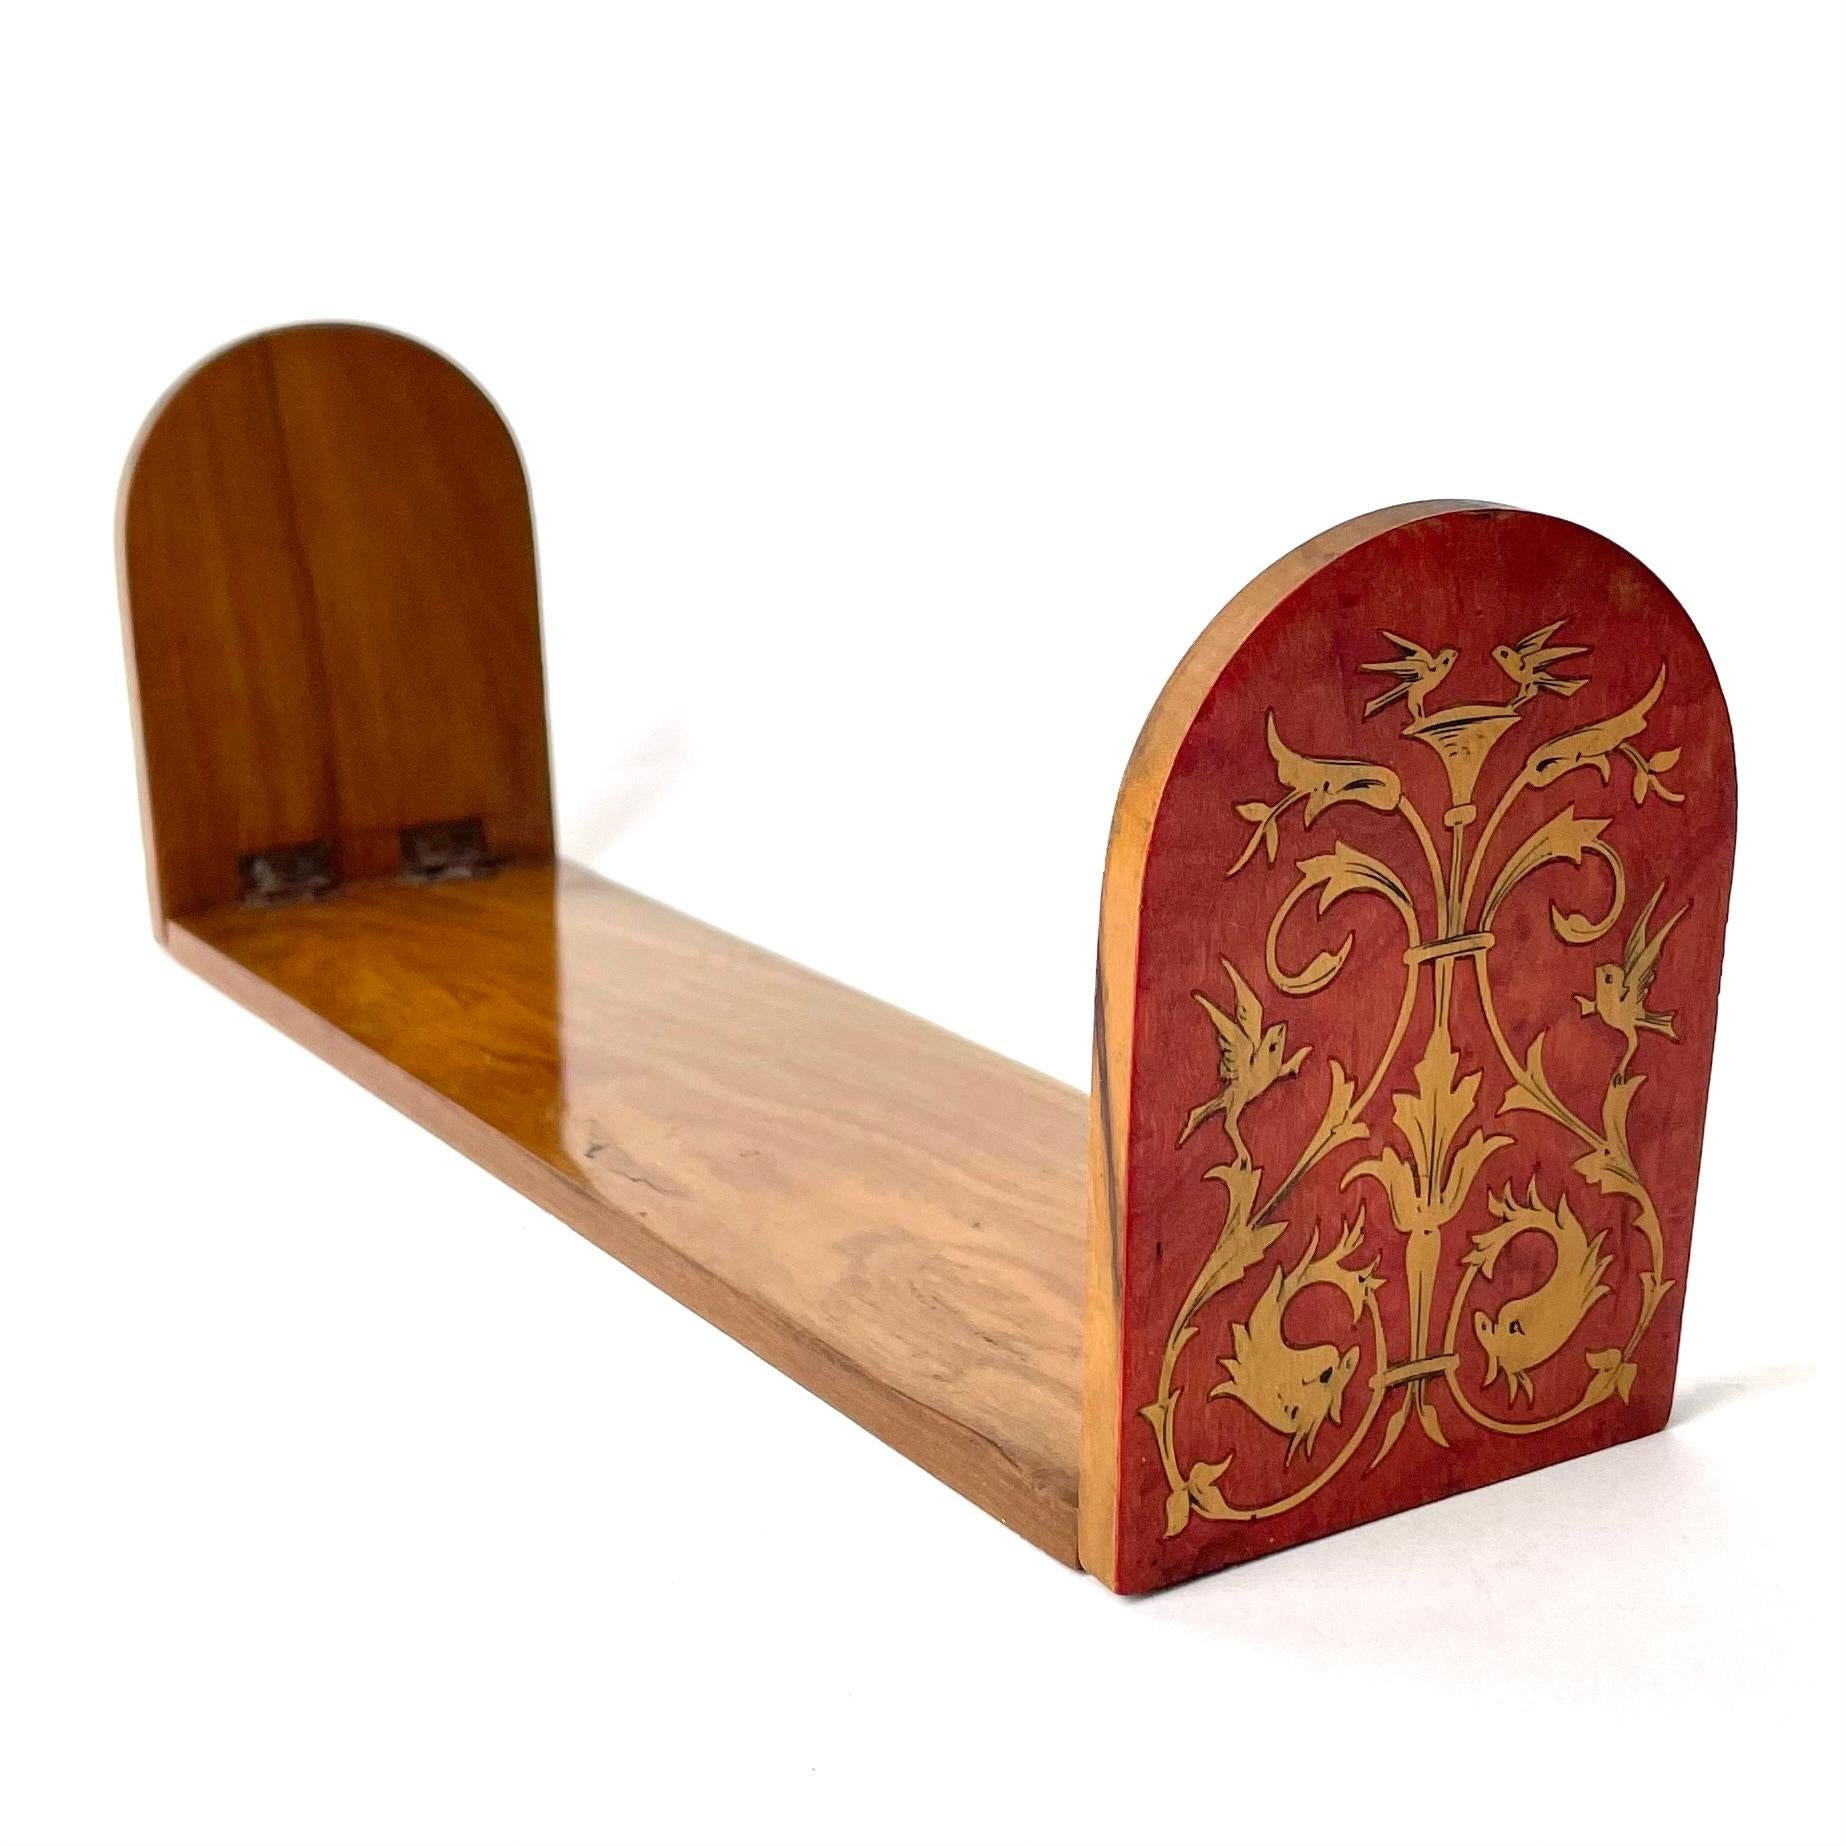 A Charming Small Bookstand made of Maple Wood with Intarsia Decor, 19th Century.

This bookstand features intarsia details on the reddened ends of the piece in the form of floral ornamentation and small birds. The piece is otherwise in maple wood,